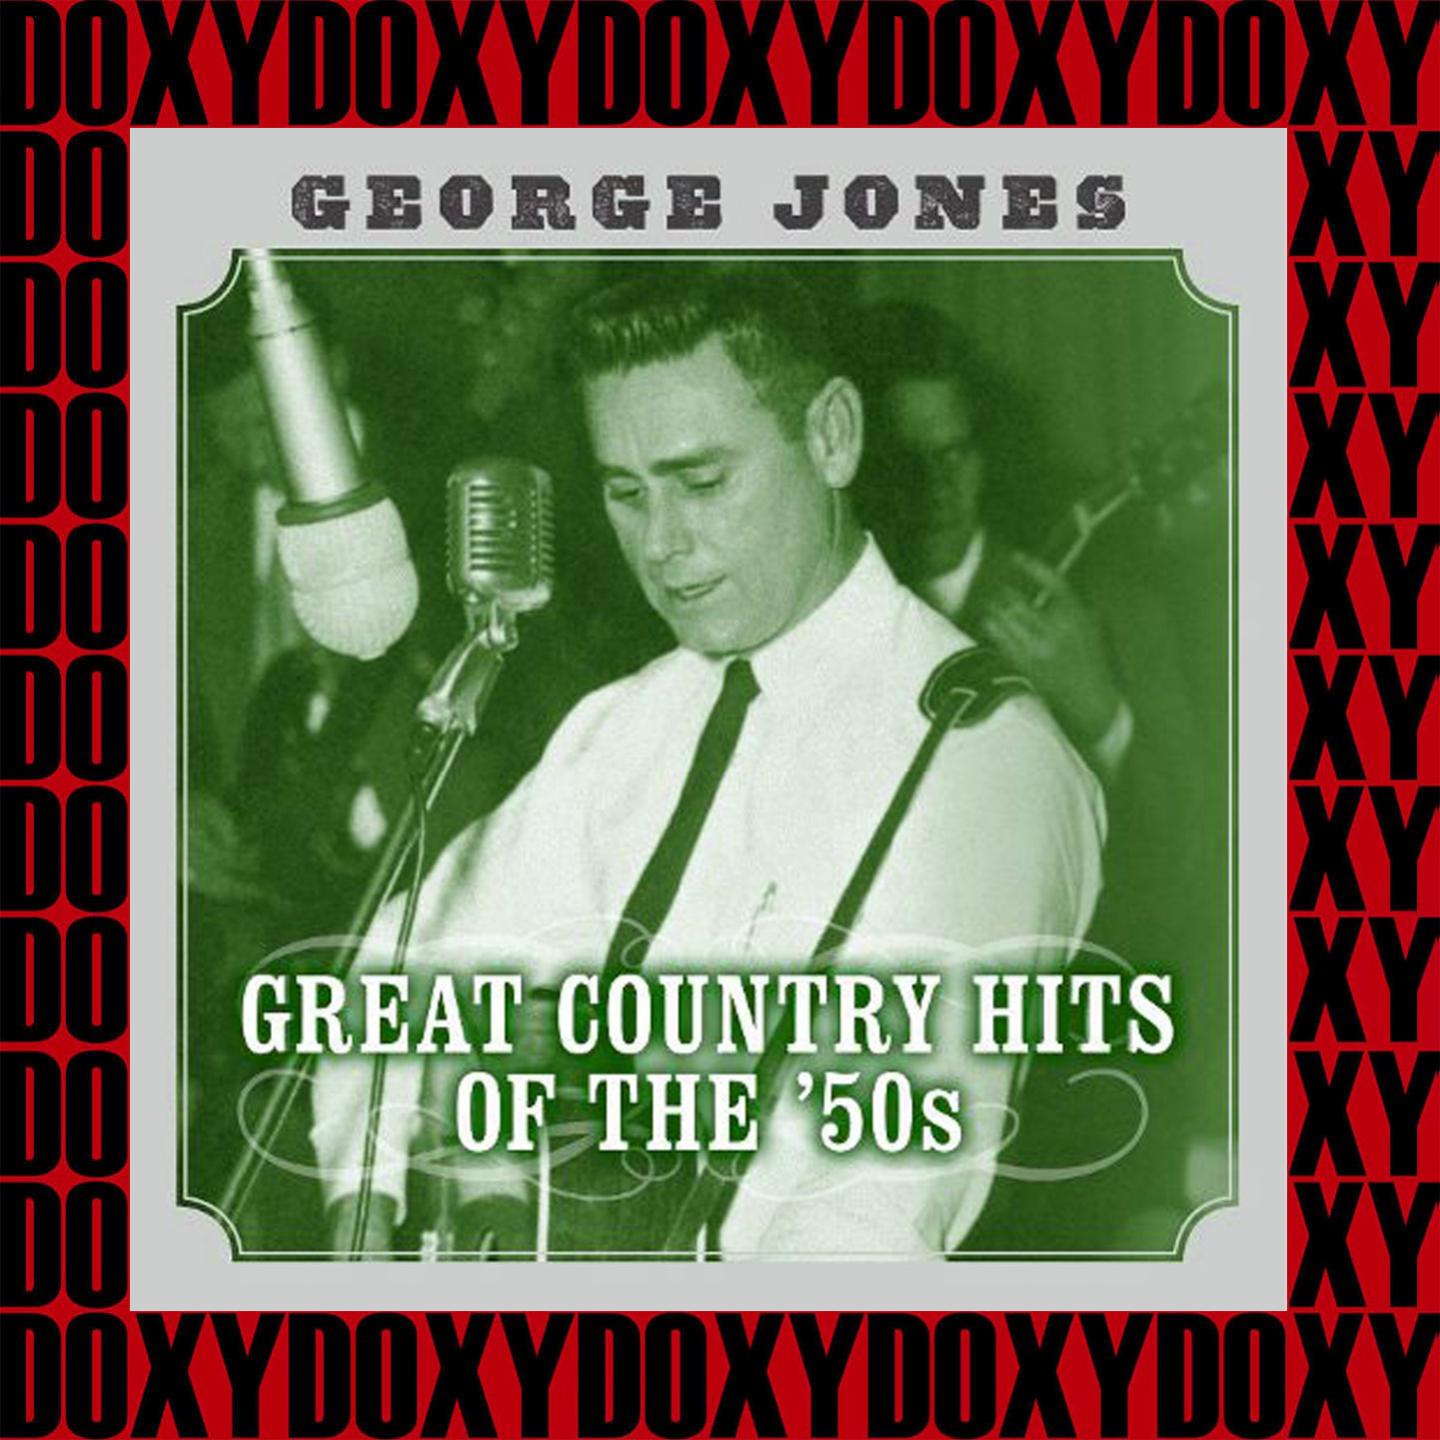 The Complete Great Country Hits Of The 50's (Remastered Version) (Doxy Collection)